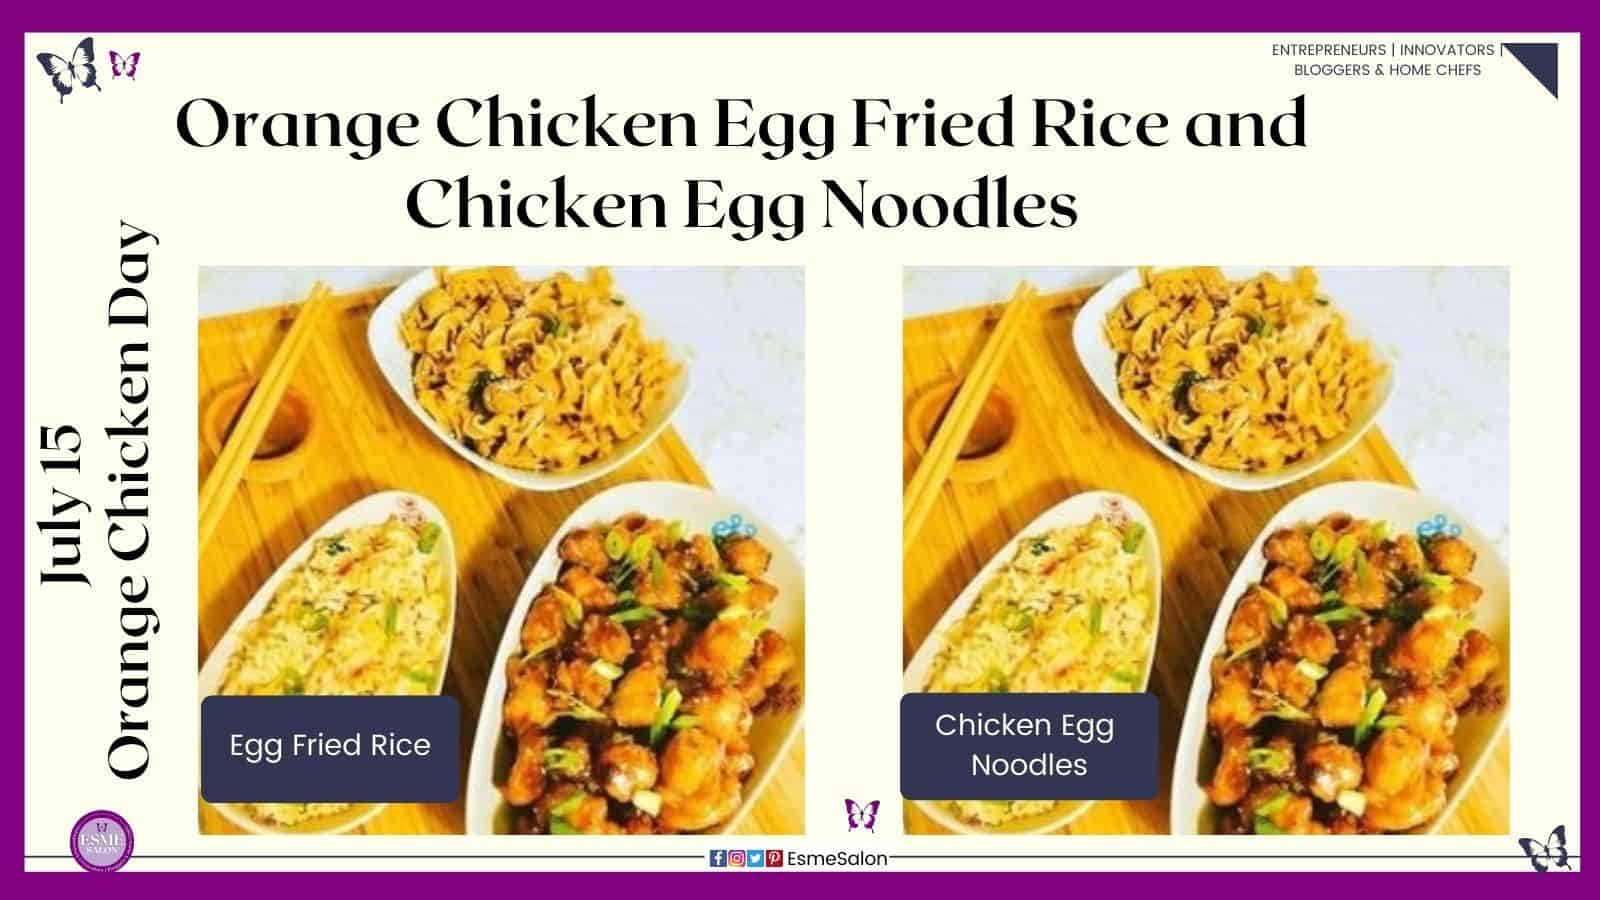 an image of Orange Chicken Egg Fried Rice and Chicken Egg Noodles